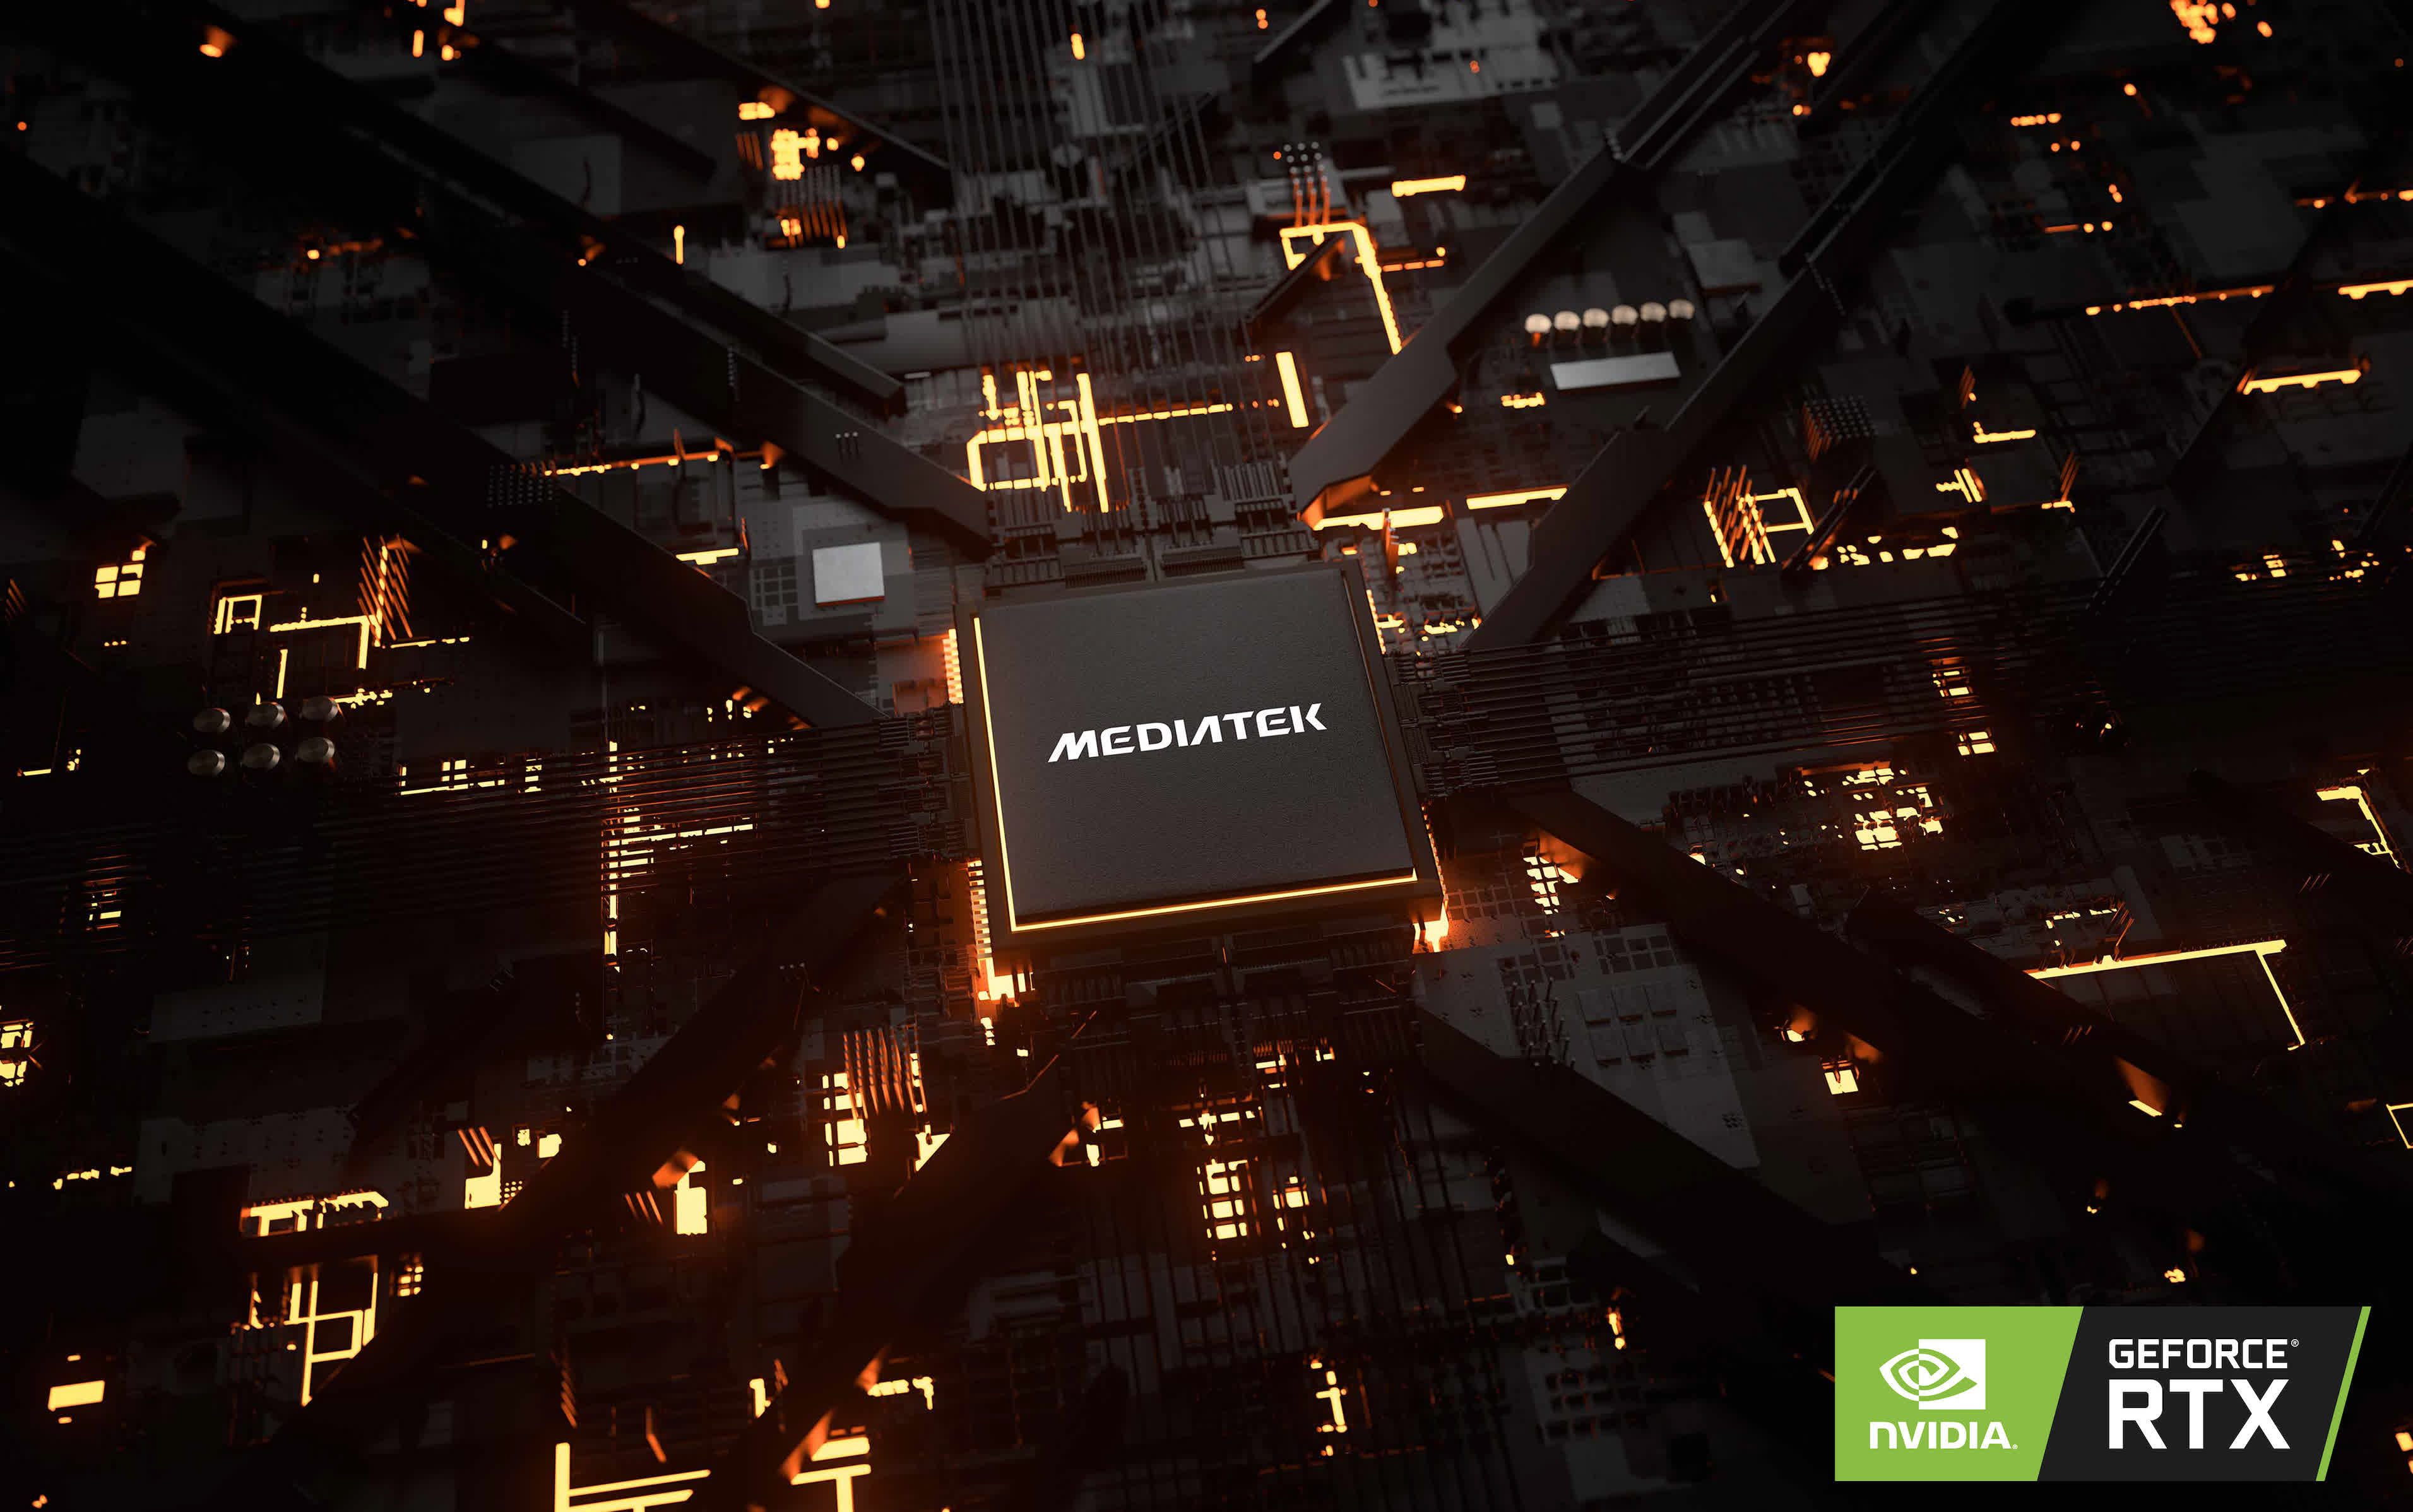 MediaTek could be working with Nvidia on adding new GPU to mobile SoC